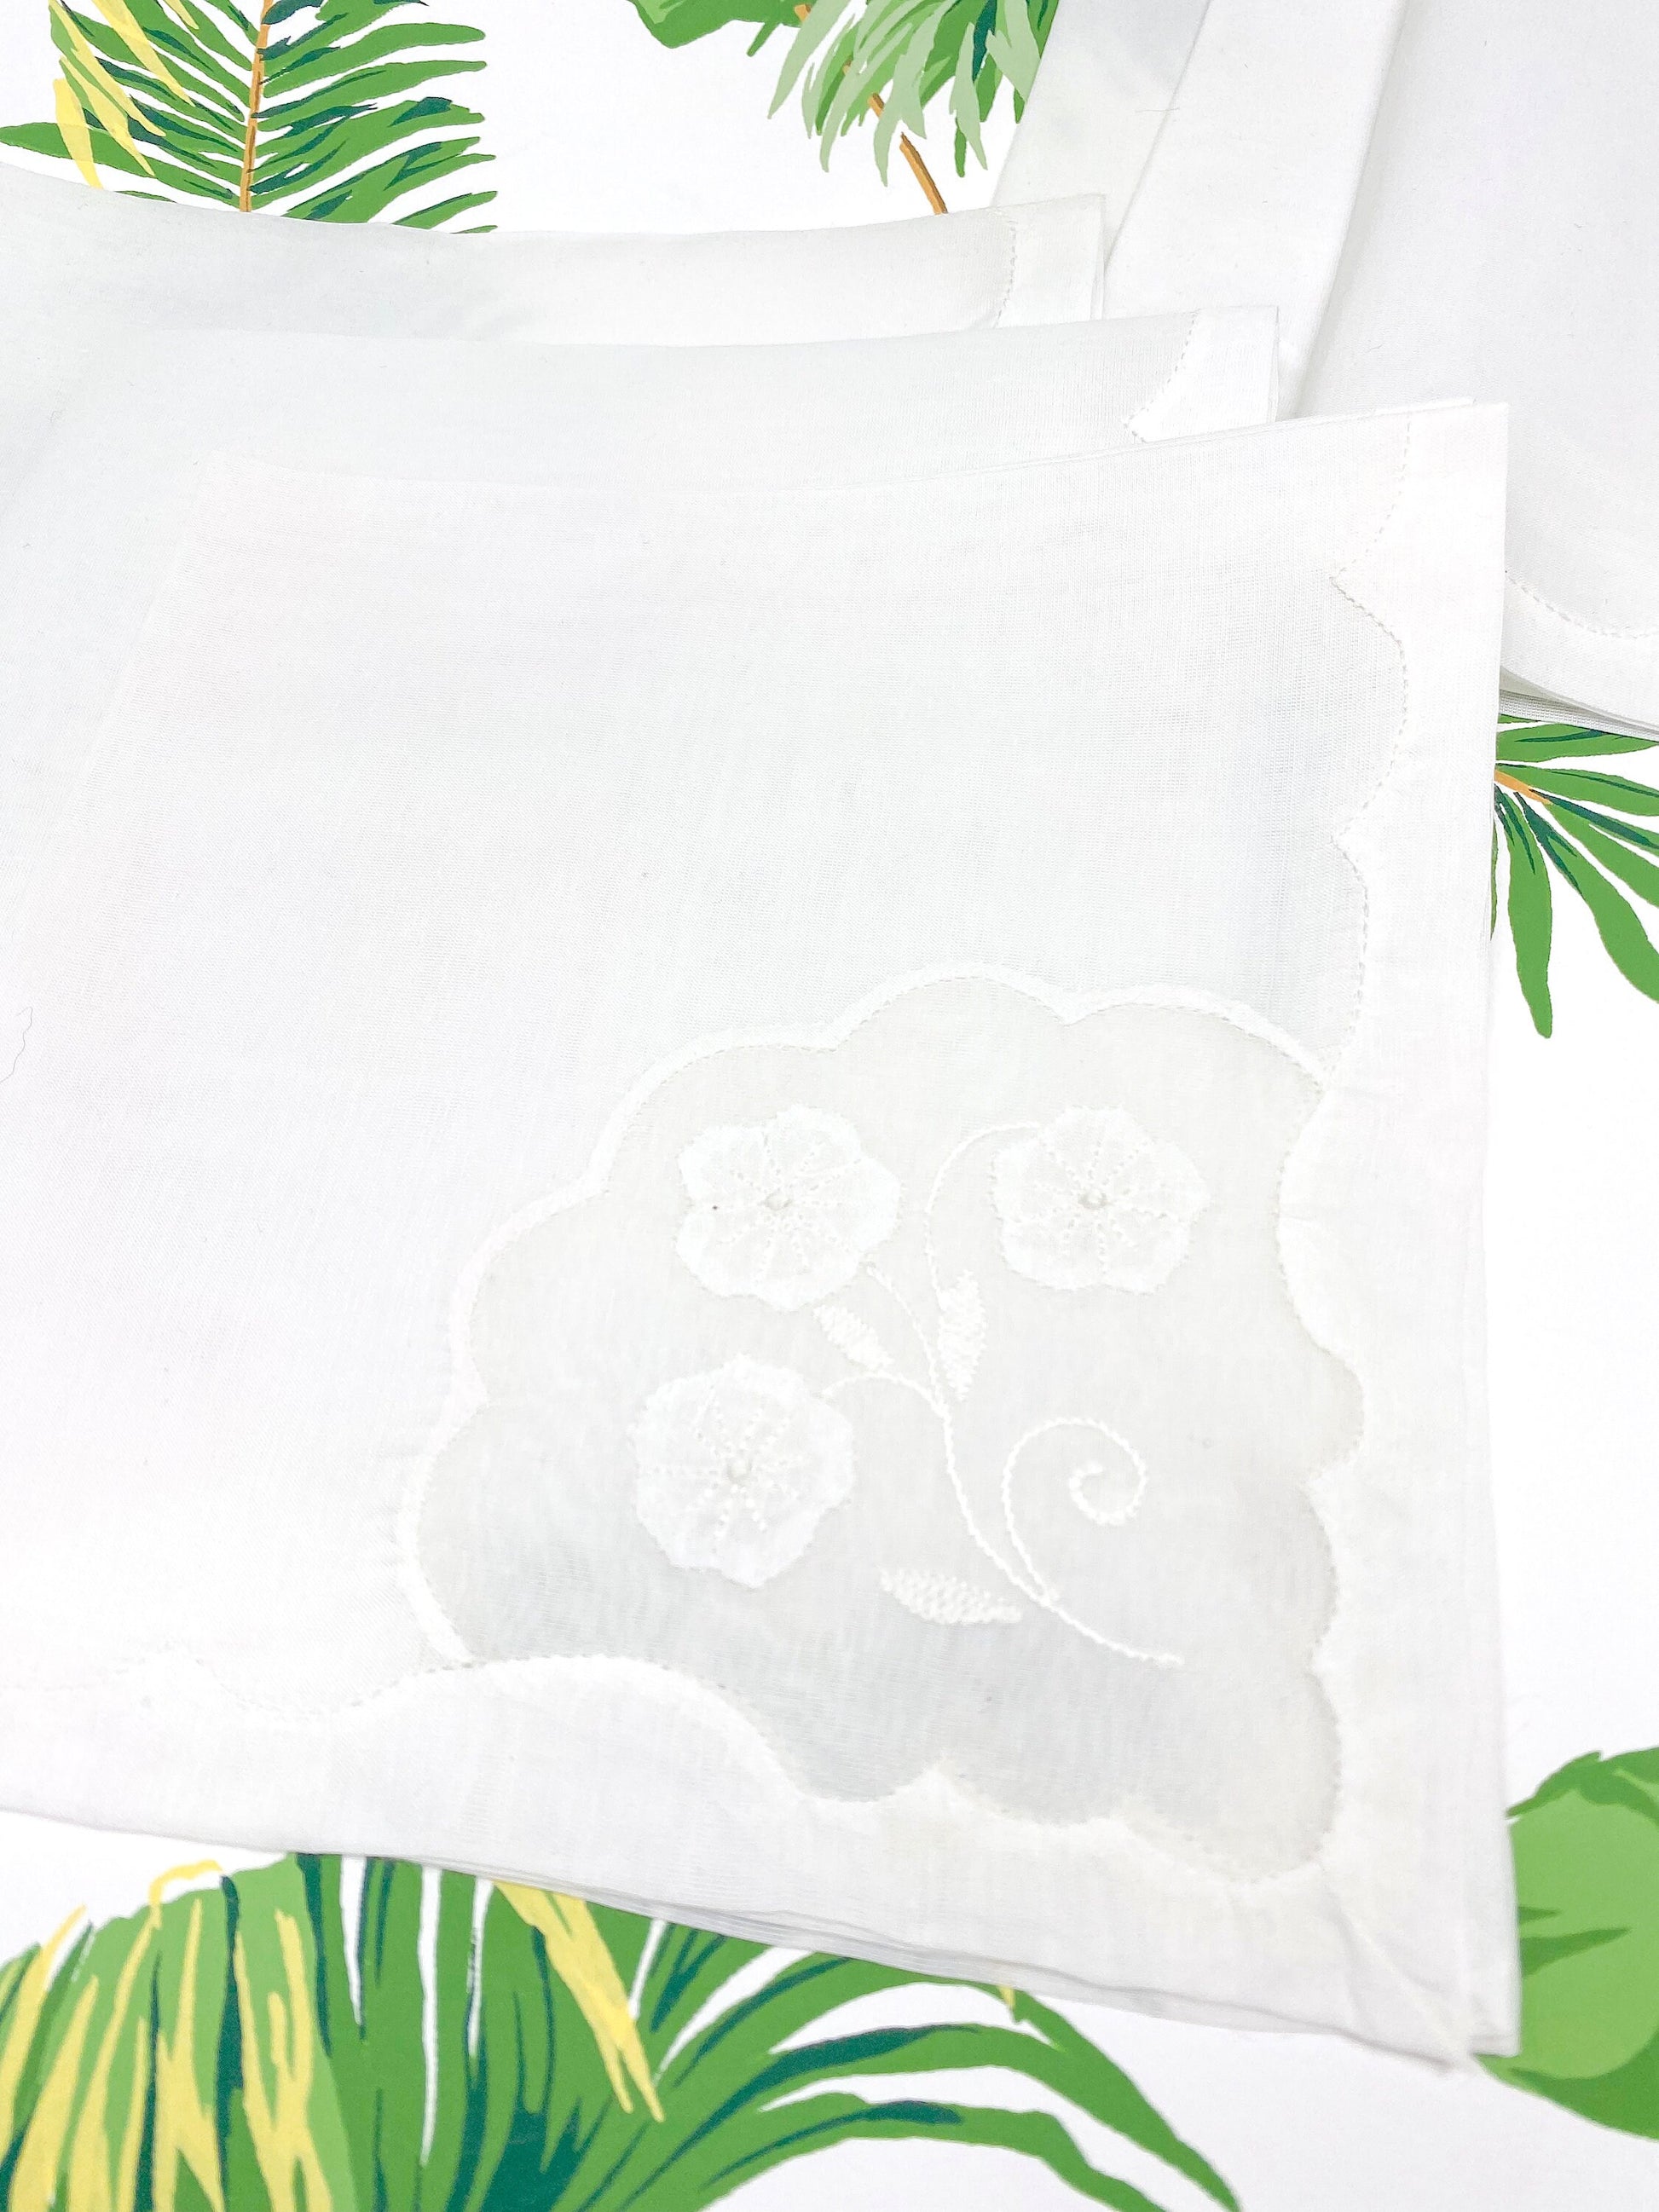 Vintage Madeira Cocktail Napkins and Placemats - White Sheer Floral